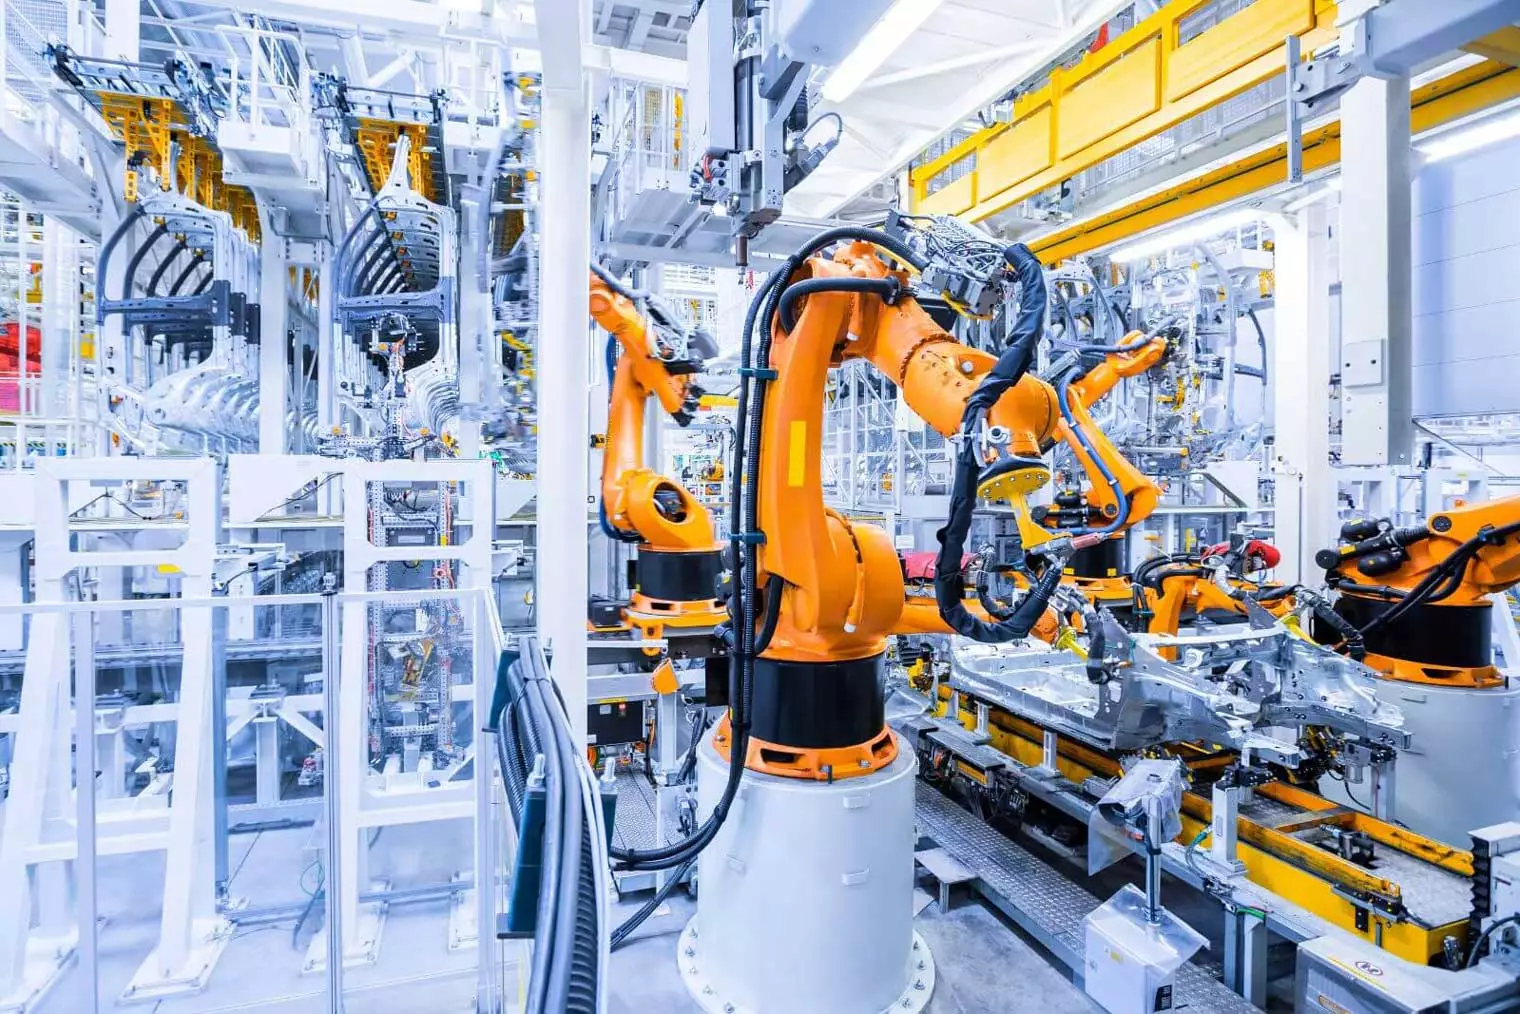 <span class="hero">Welcome to</span> Industrial Robot Help!